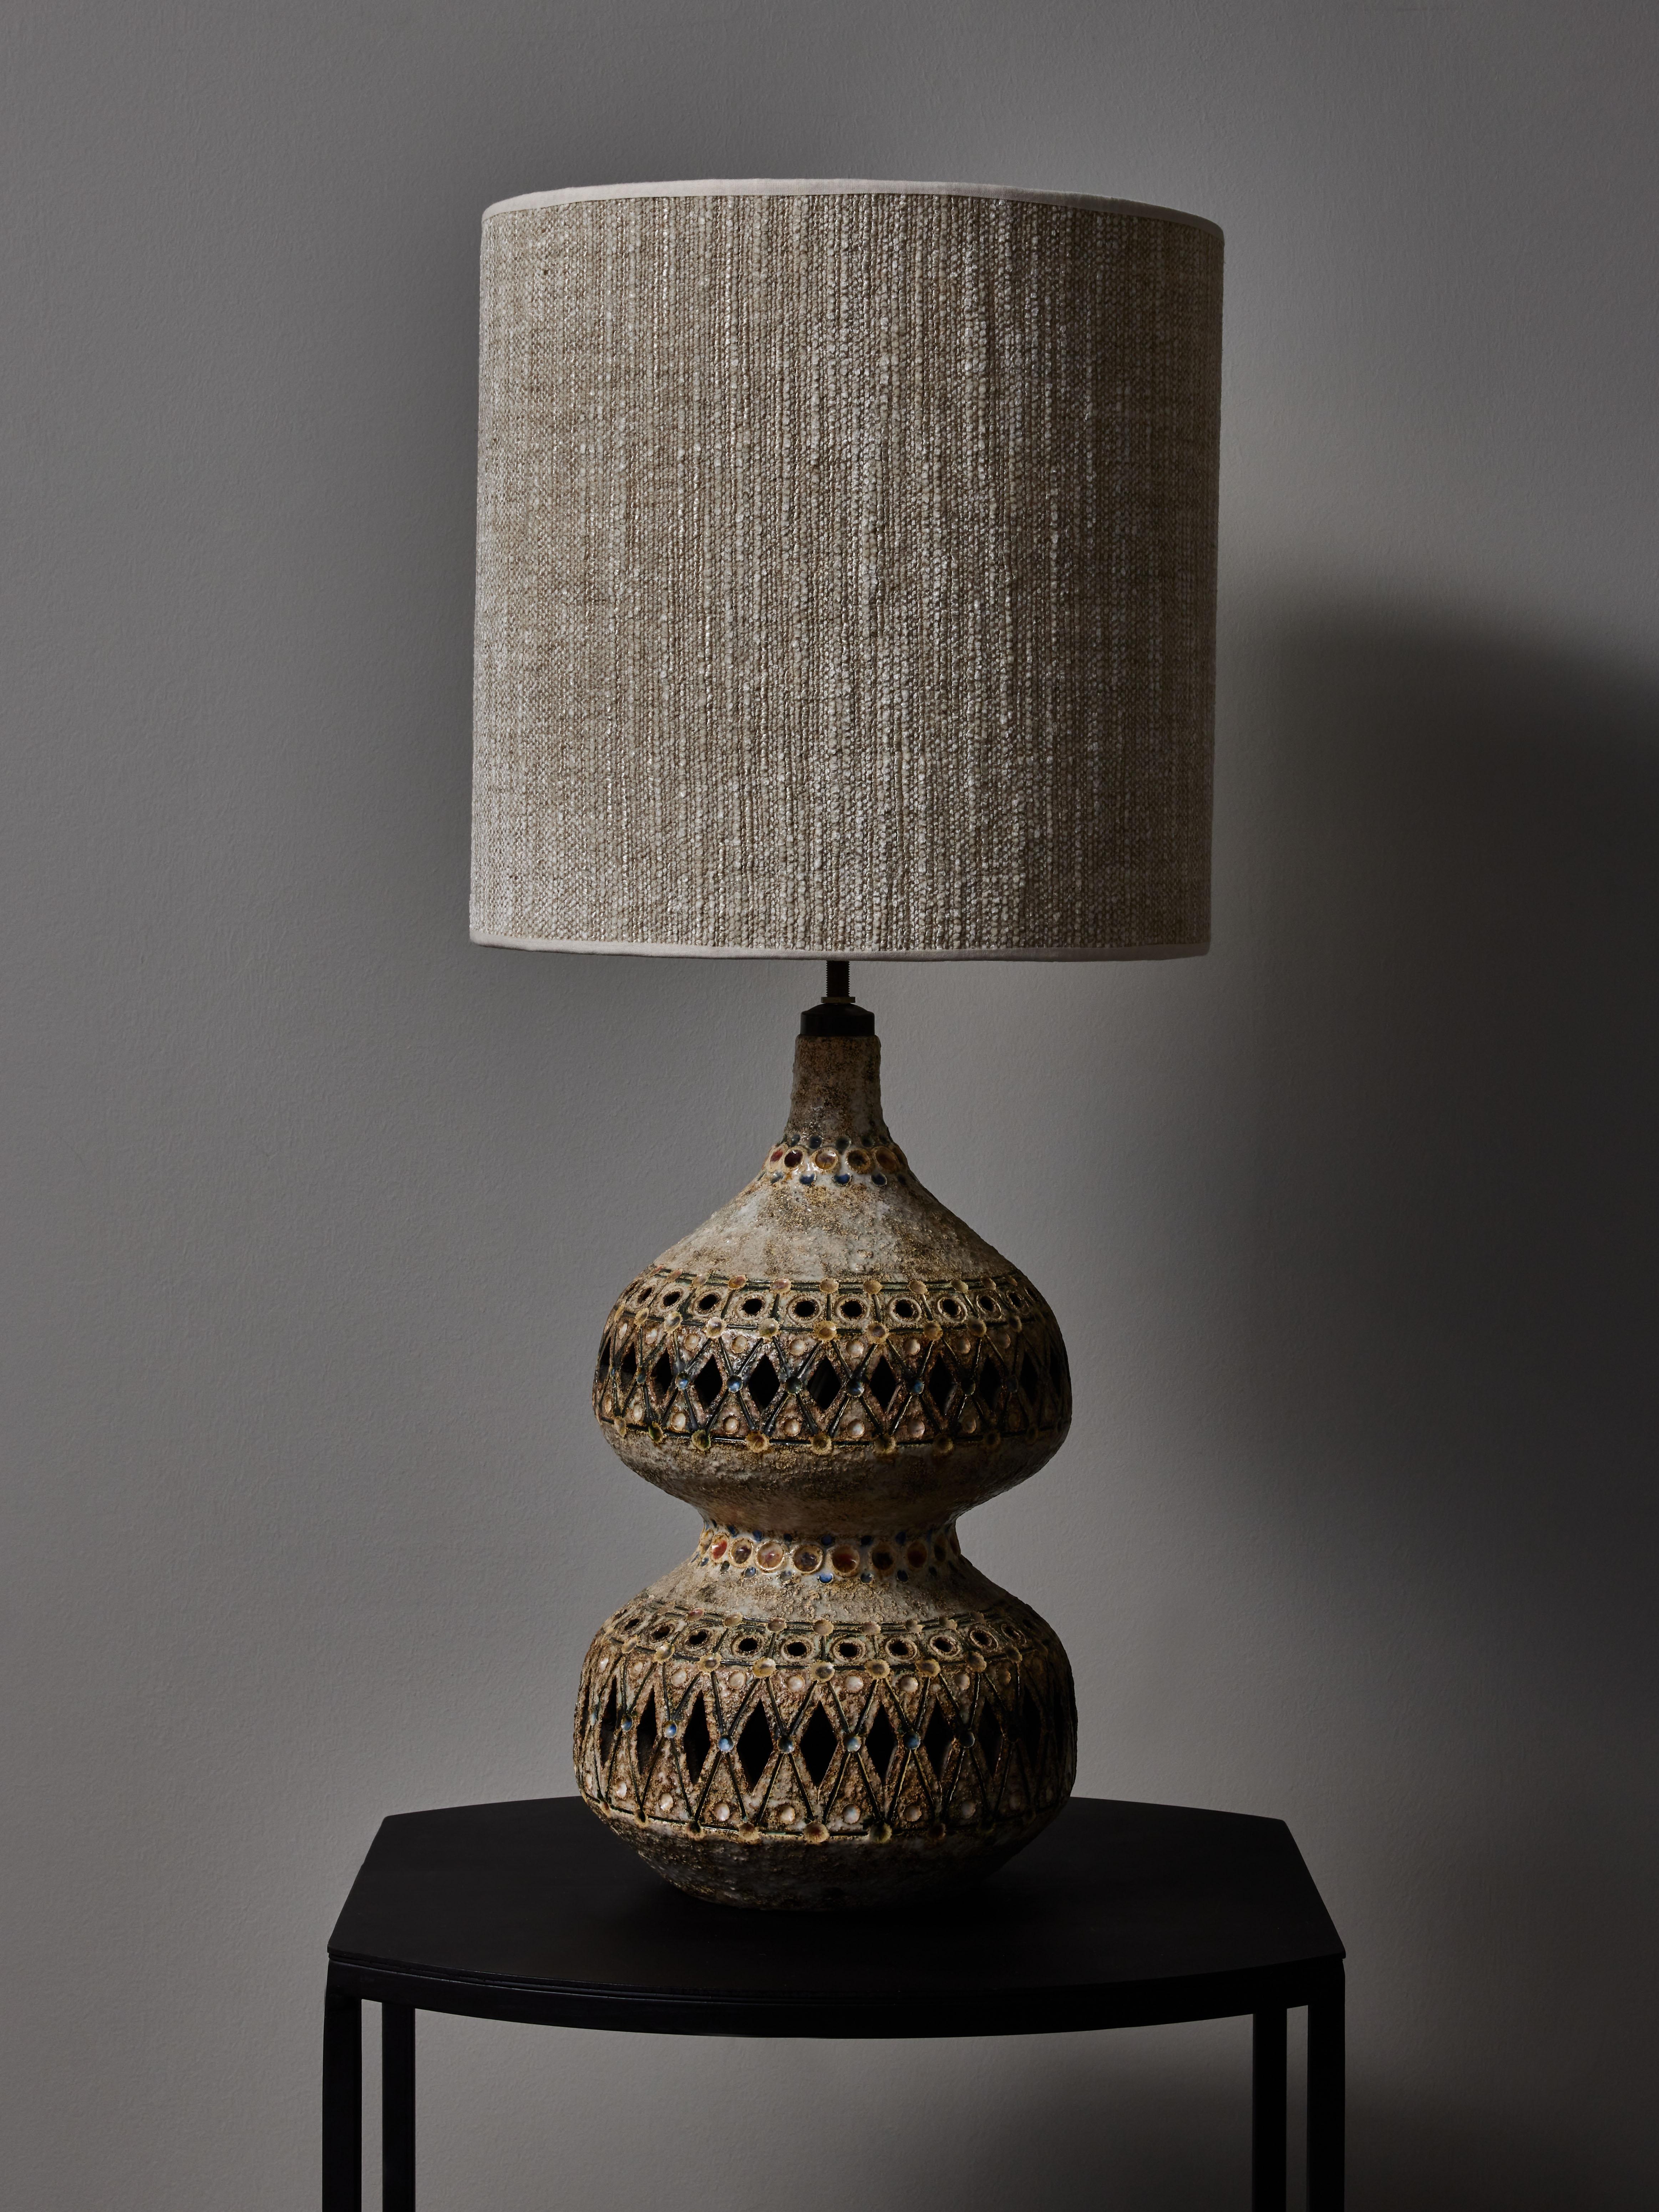 Vintage ceramic table lamp in earth tones covered in details such as small dots of colours and see through geometrical shapes, by Raphael Giarrusso circa 1968. Topped with a new lampshade with Dedar Milano fabric.

Raphaël Giarrusso